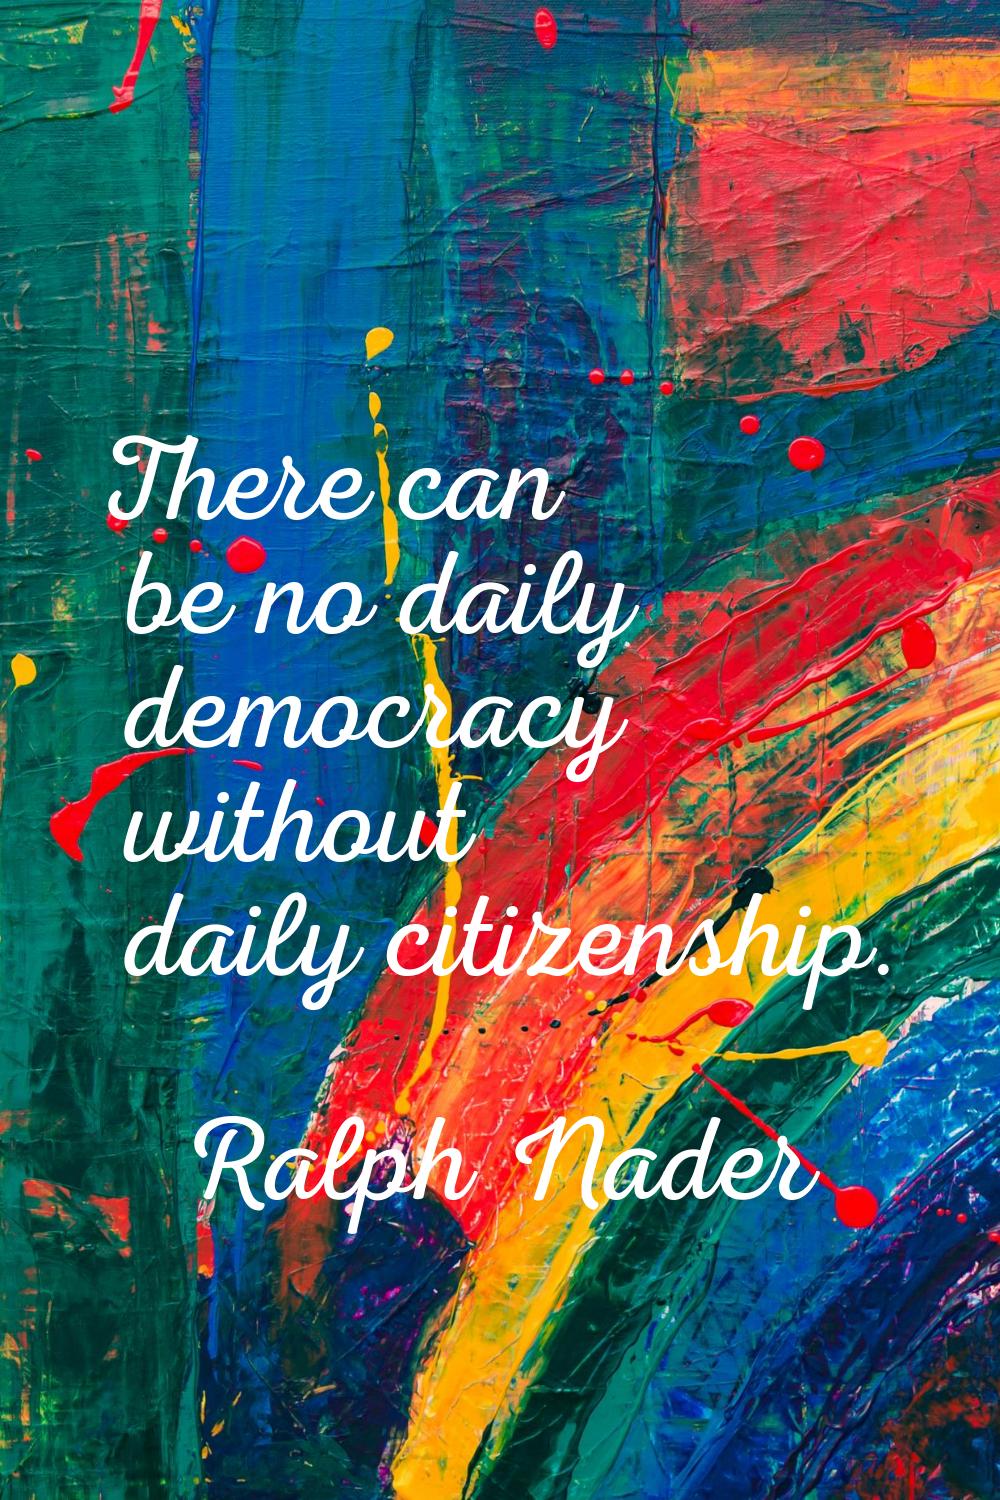 There can be no daily democracy without daily citizenship.